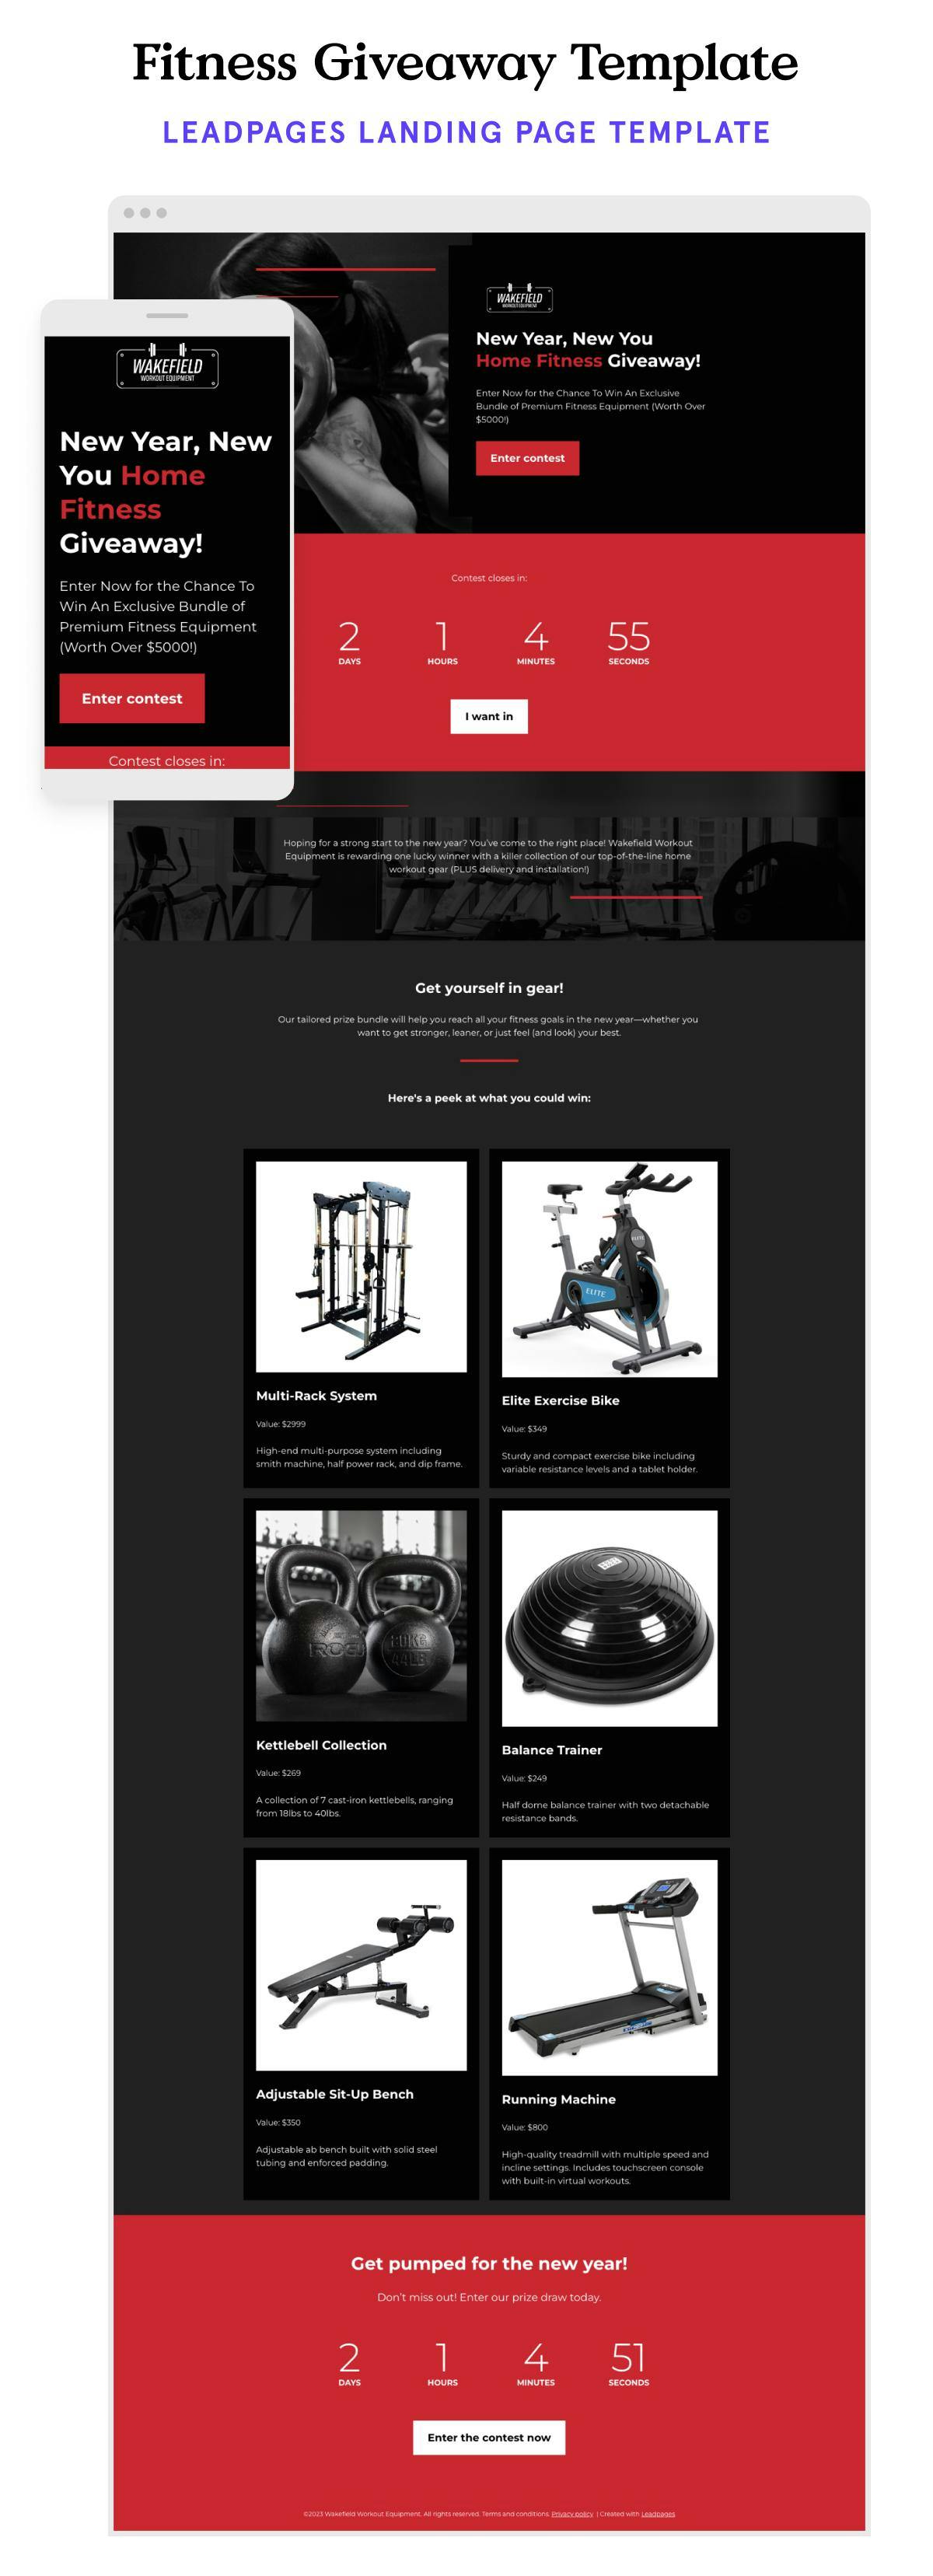 Fitness giveaway landing page template